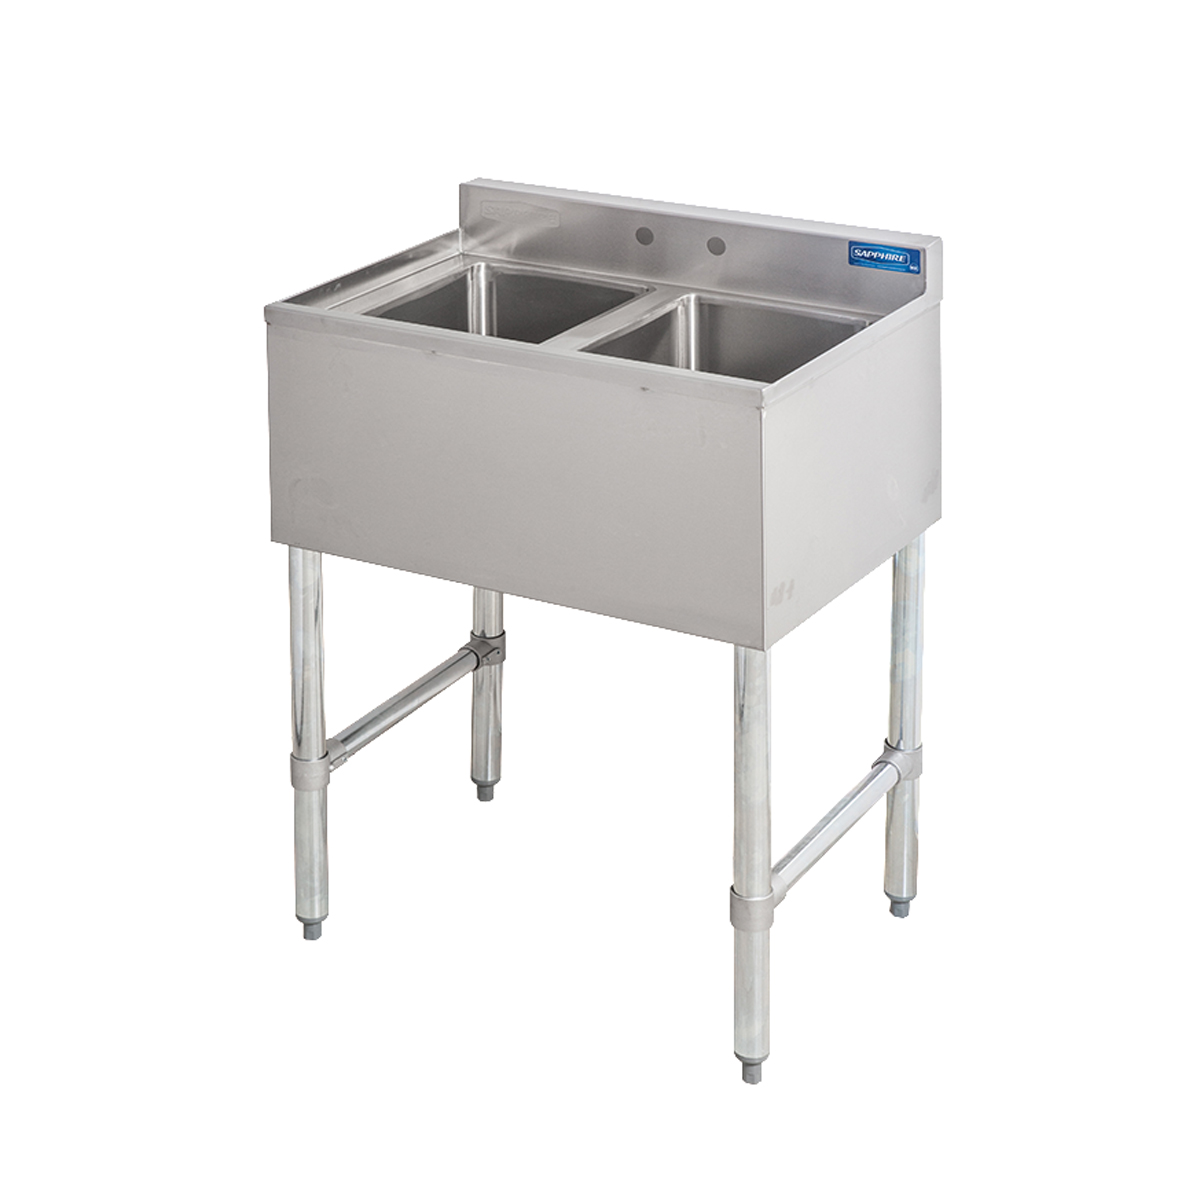 Sapphire SMBS-2 Two Compartment Underbar Sink Unit